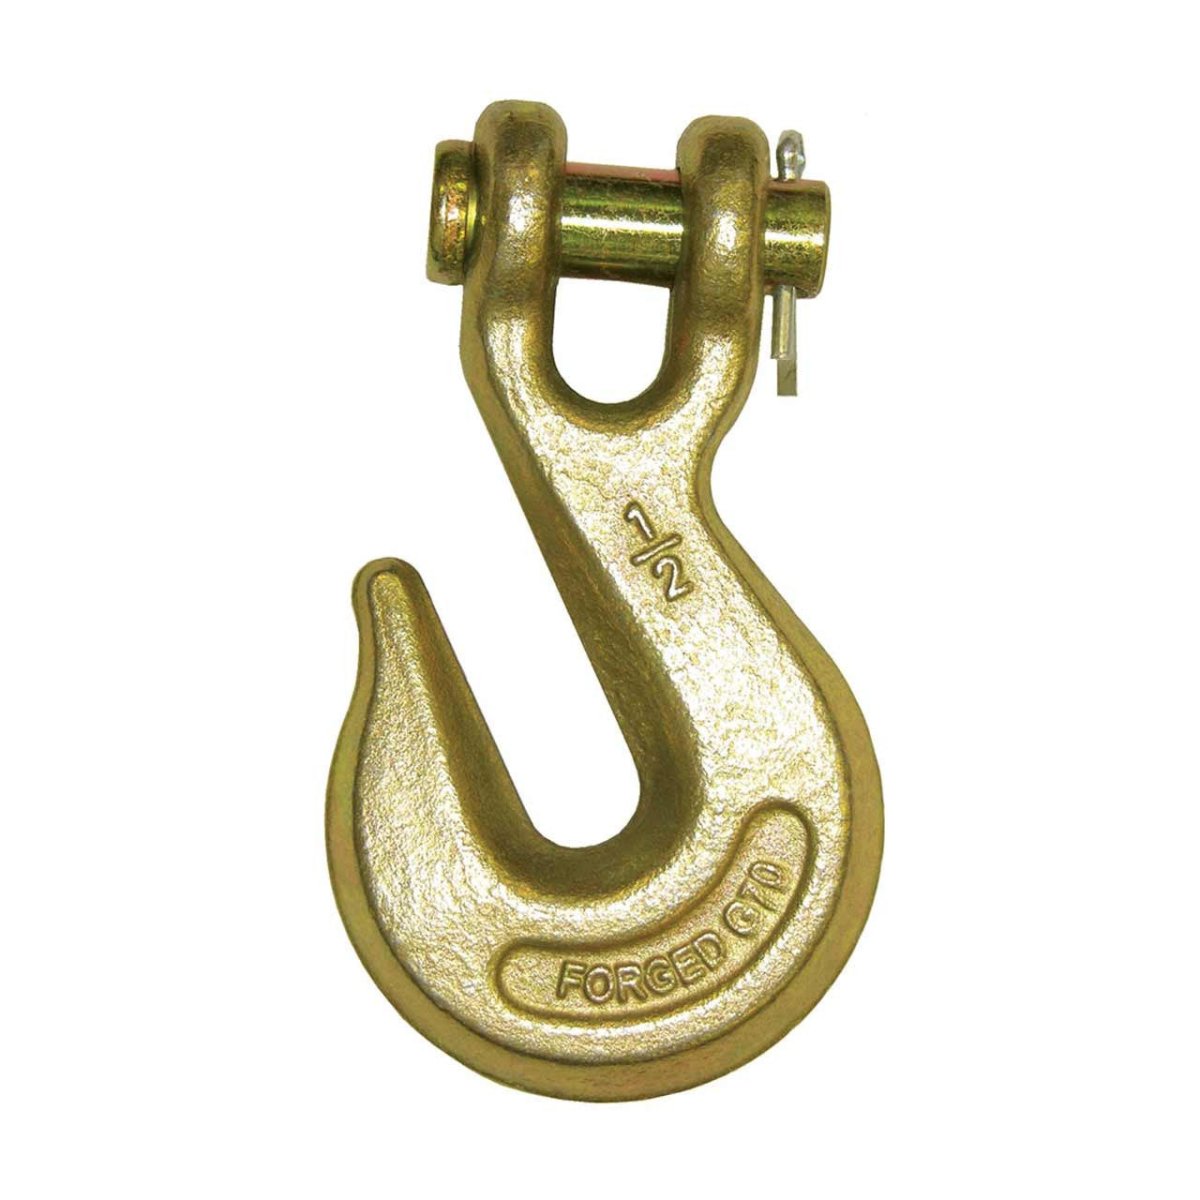 B/A Products Co. Clevis Grab Hook - starequipmentsales